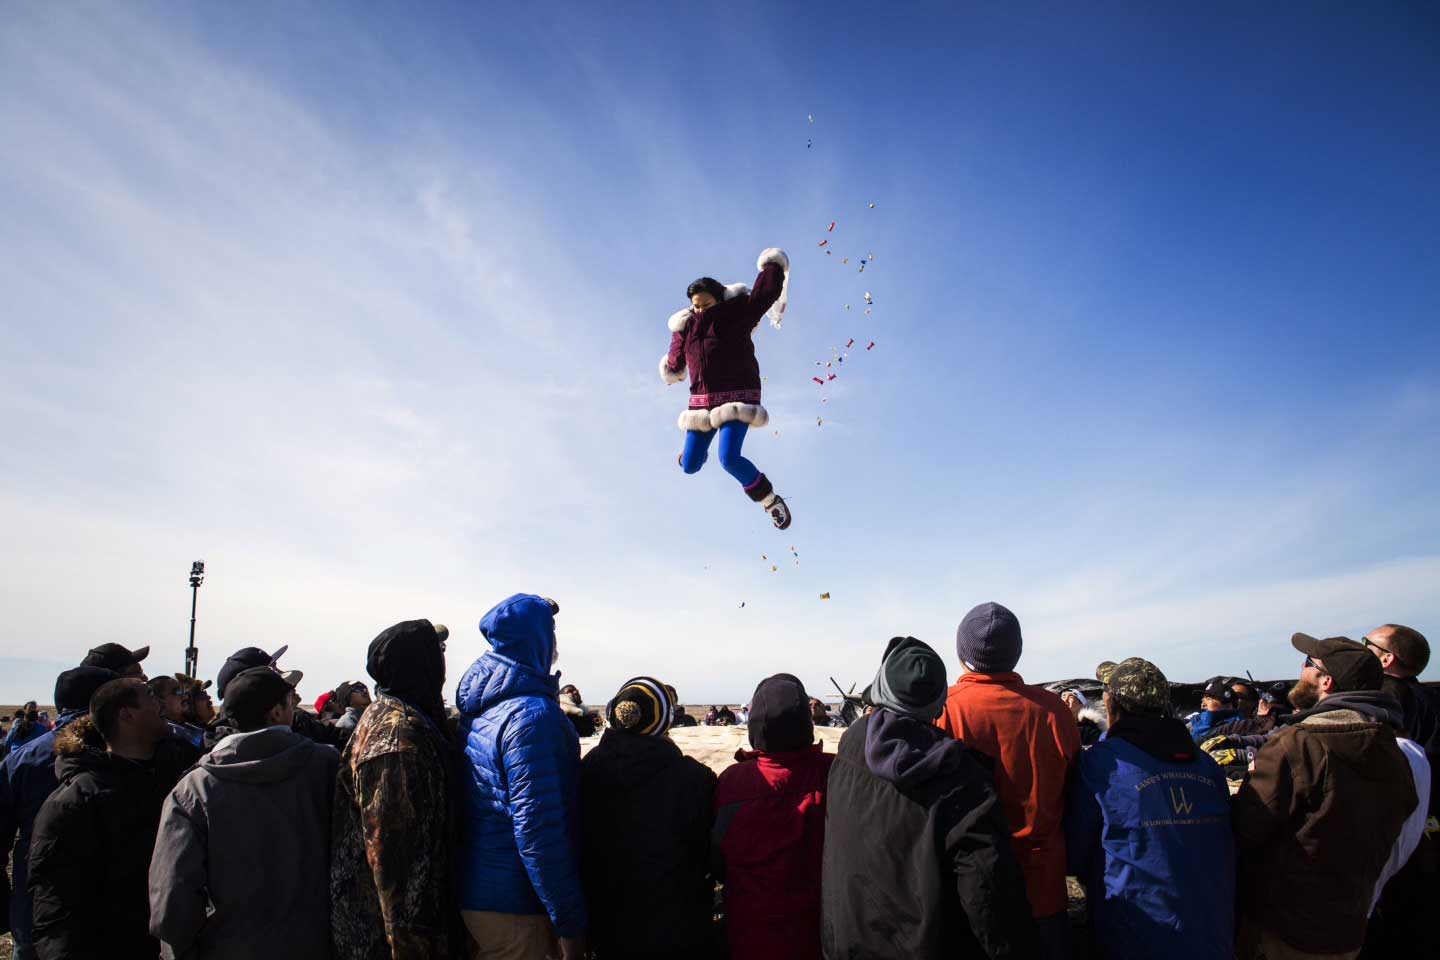 The traditional blanket toss at the annual whaling feast in Point Hope, Alaska on June 16, 2015. For the Inupiat villagers of Point Hope Nothing is more important than the bowhead whale. The calendar year revolves around hunting, fishing and gathering, a lifestyle Alaskans call “subsistence,” which is as much cultural tradition as economic necessity. The entire village looks forward to spring whaling, and celebrates a successful hunt with an annual feast. In recent years, however, the much-anticipated whale hunt has run up against a warming Arctic. Ice is getting thinner, windows of opportunity for hunting are shrinking and animal behavior is changing. Alaska had its hottest year on record in 2014, and for Inupiat villagers in Point Hope who have hunted and foraged their meals for generations, climate change now threatens their way of life.